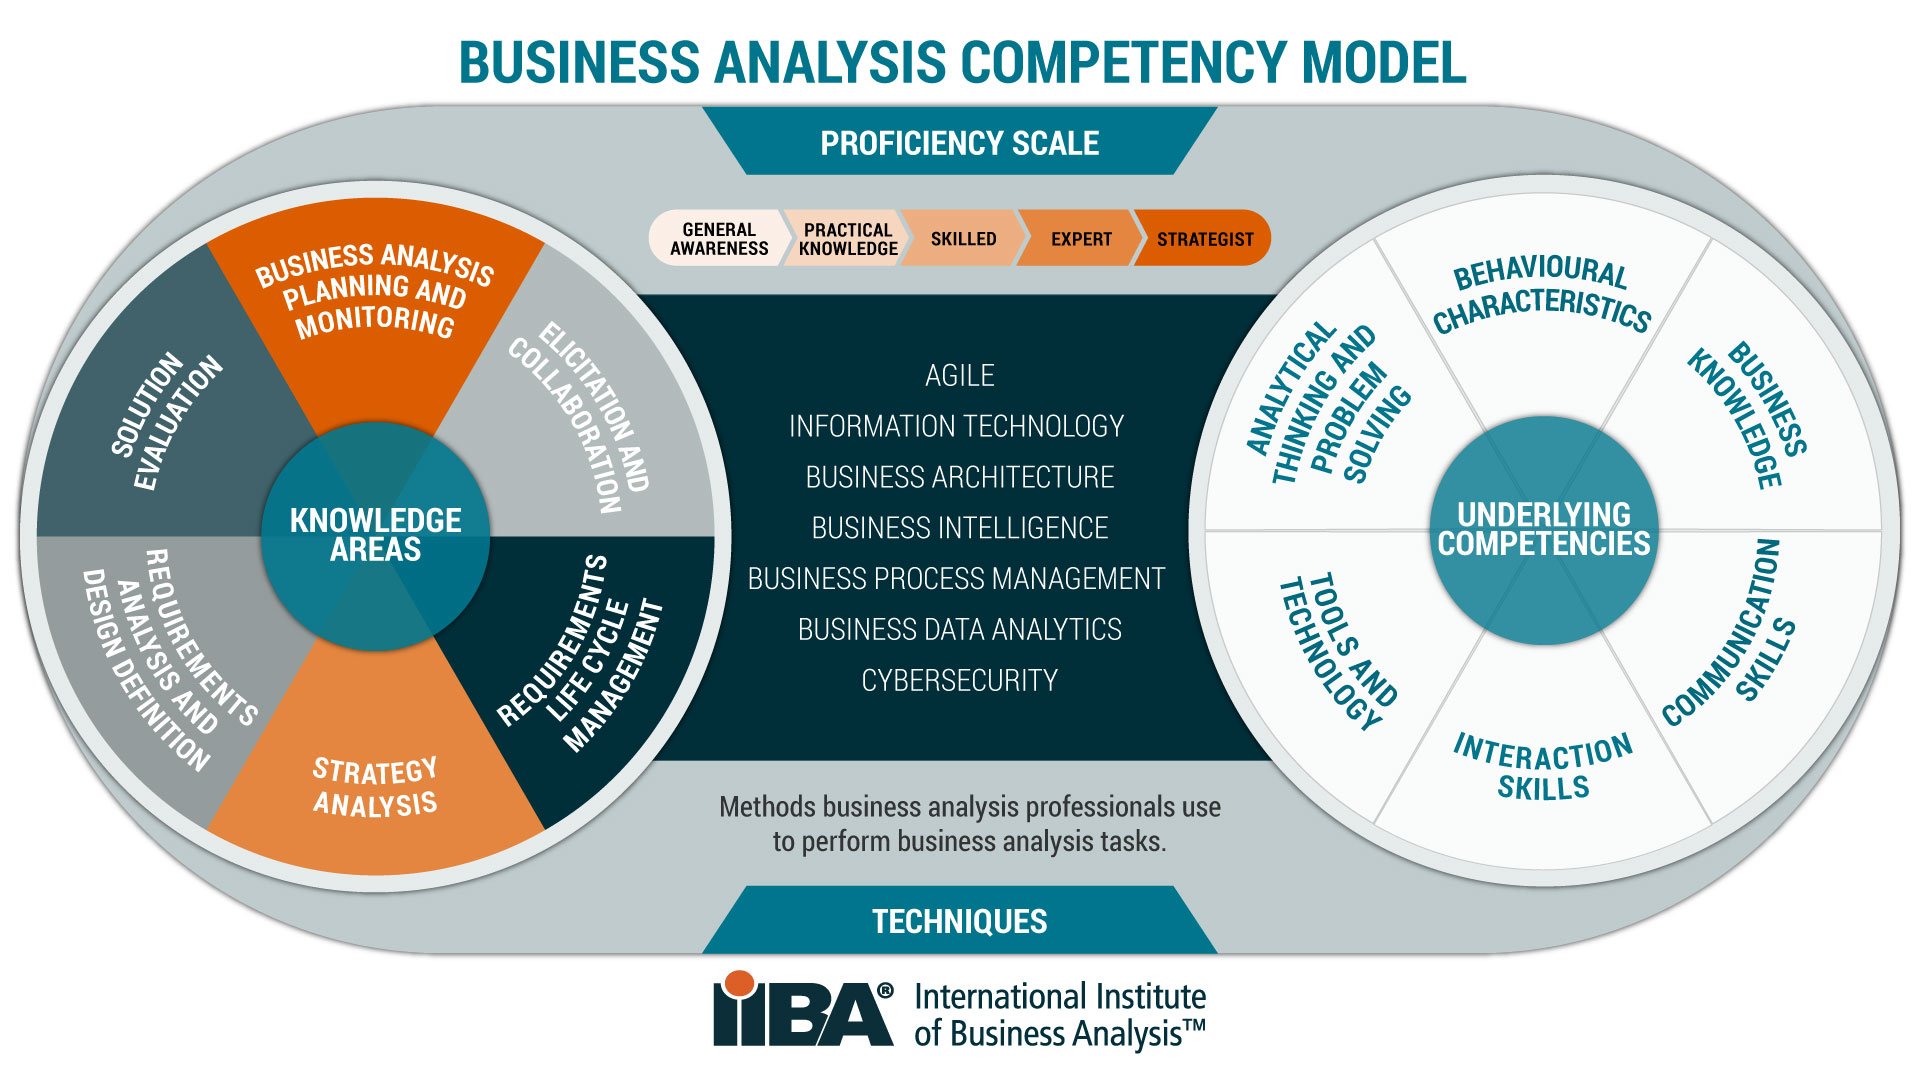 competency model book cover.jpg